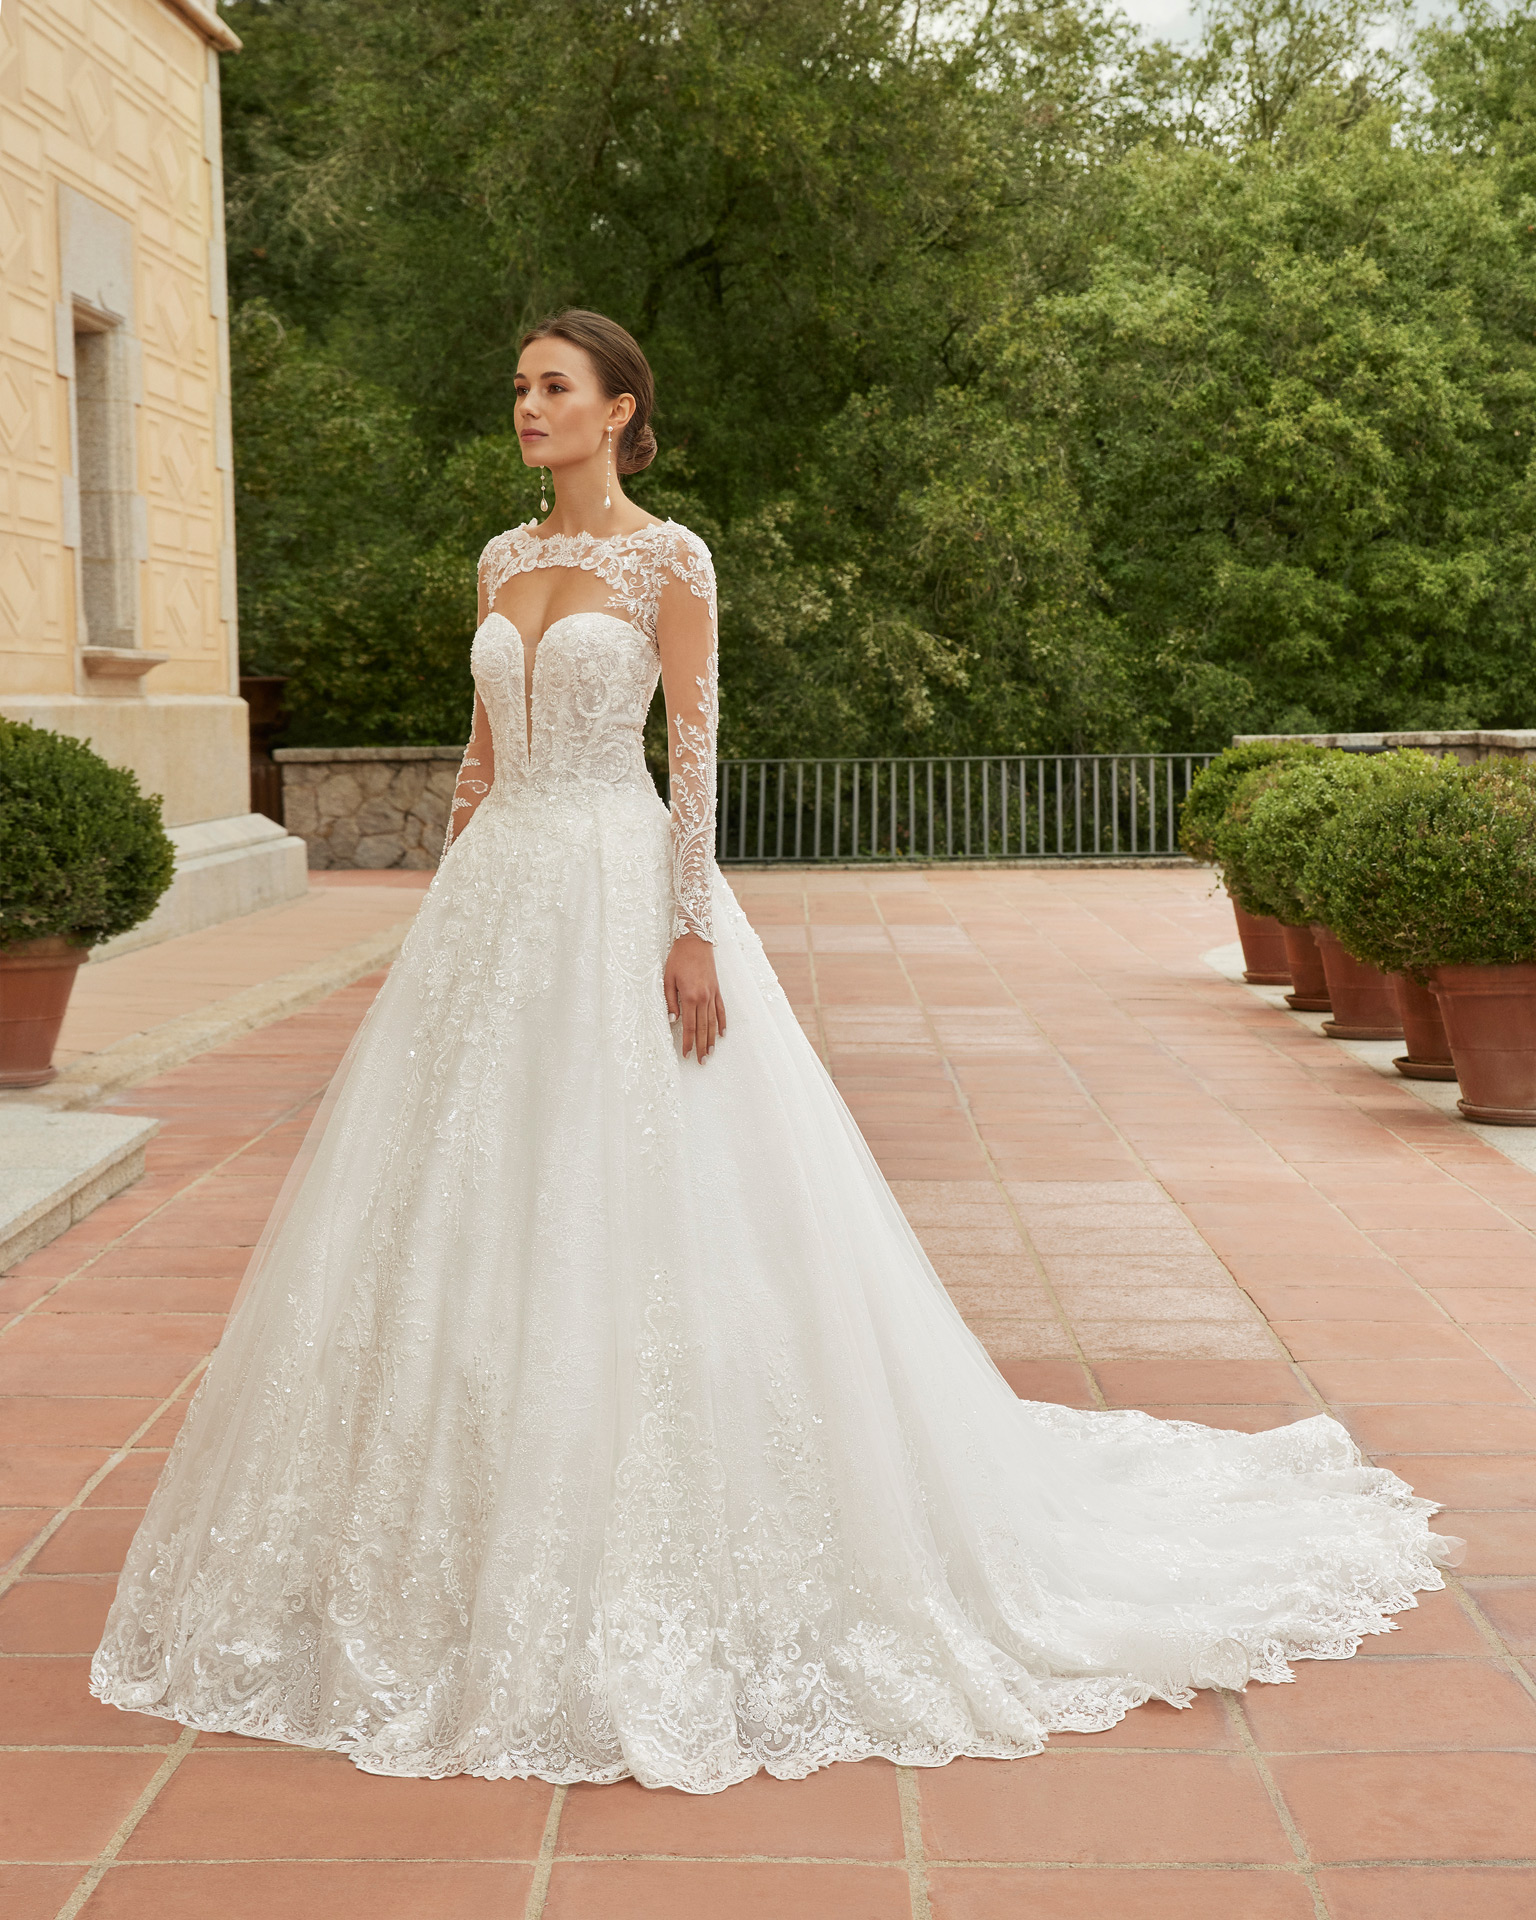 Romantic two-piece princess wedding dress, made with lace and beadwork. Featuring a sweetheart neckline, buttoned back and detachable straps, complemented by a lace and beadwork jacket. Wear this dreamy Luna Studio outfit with pride. LUNA_NOVIAS.